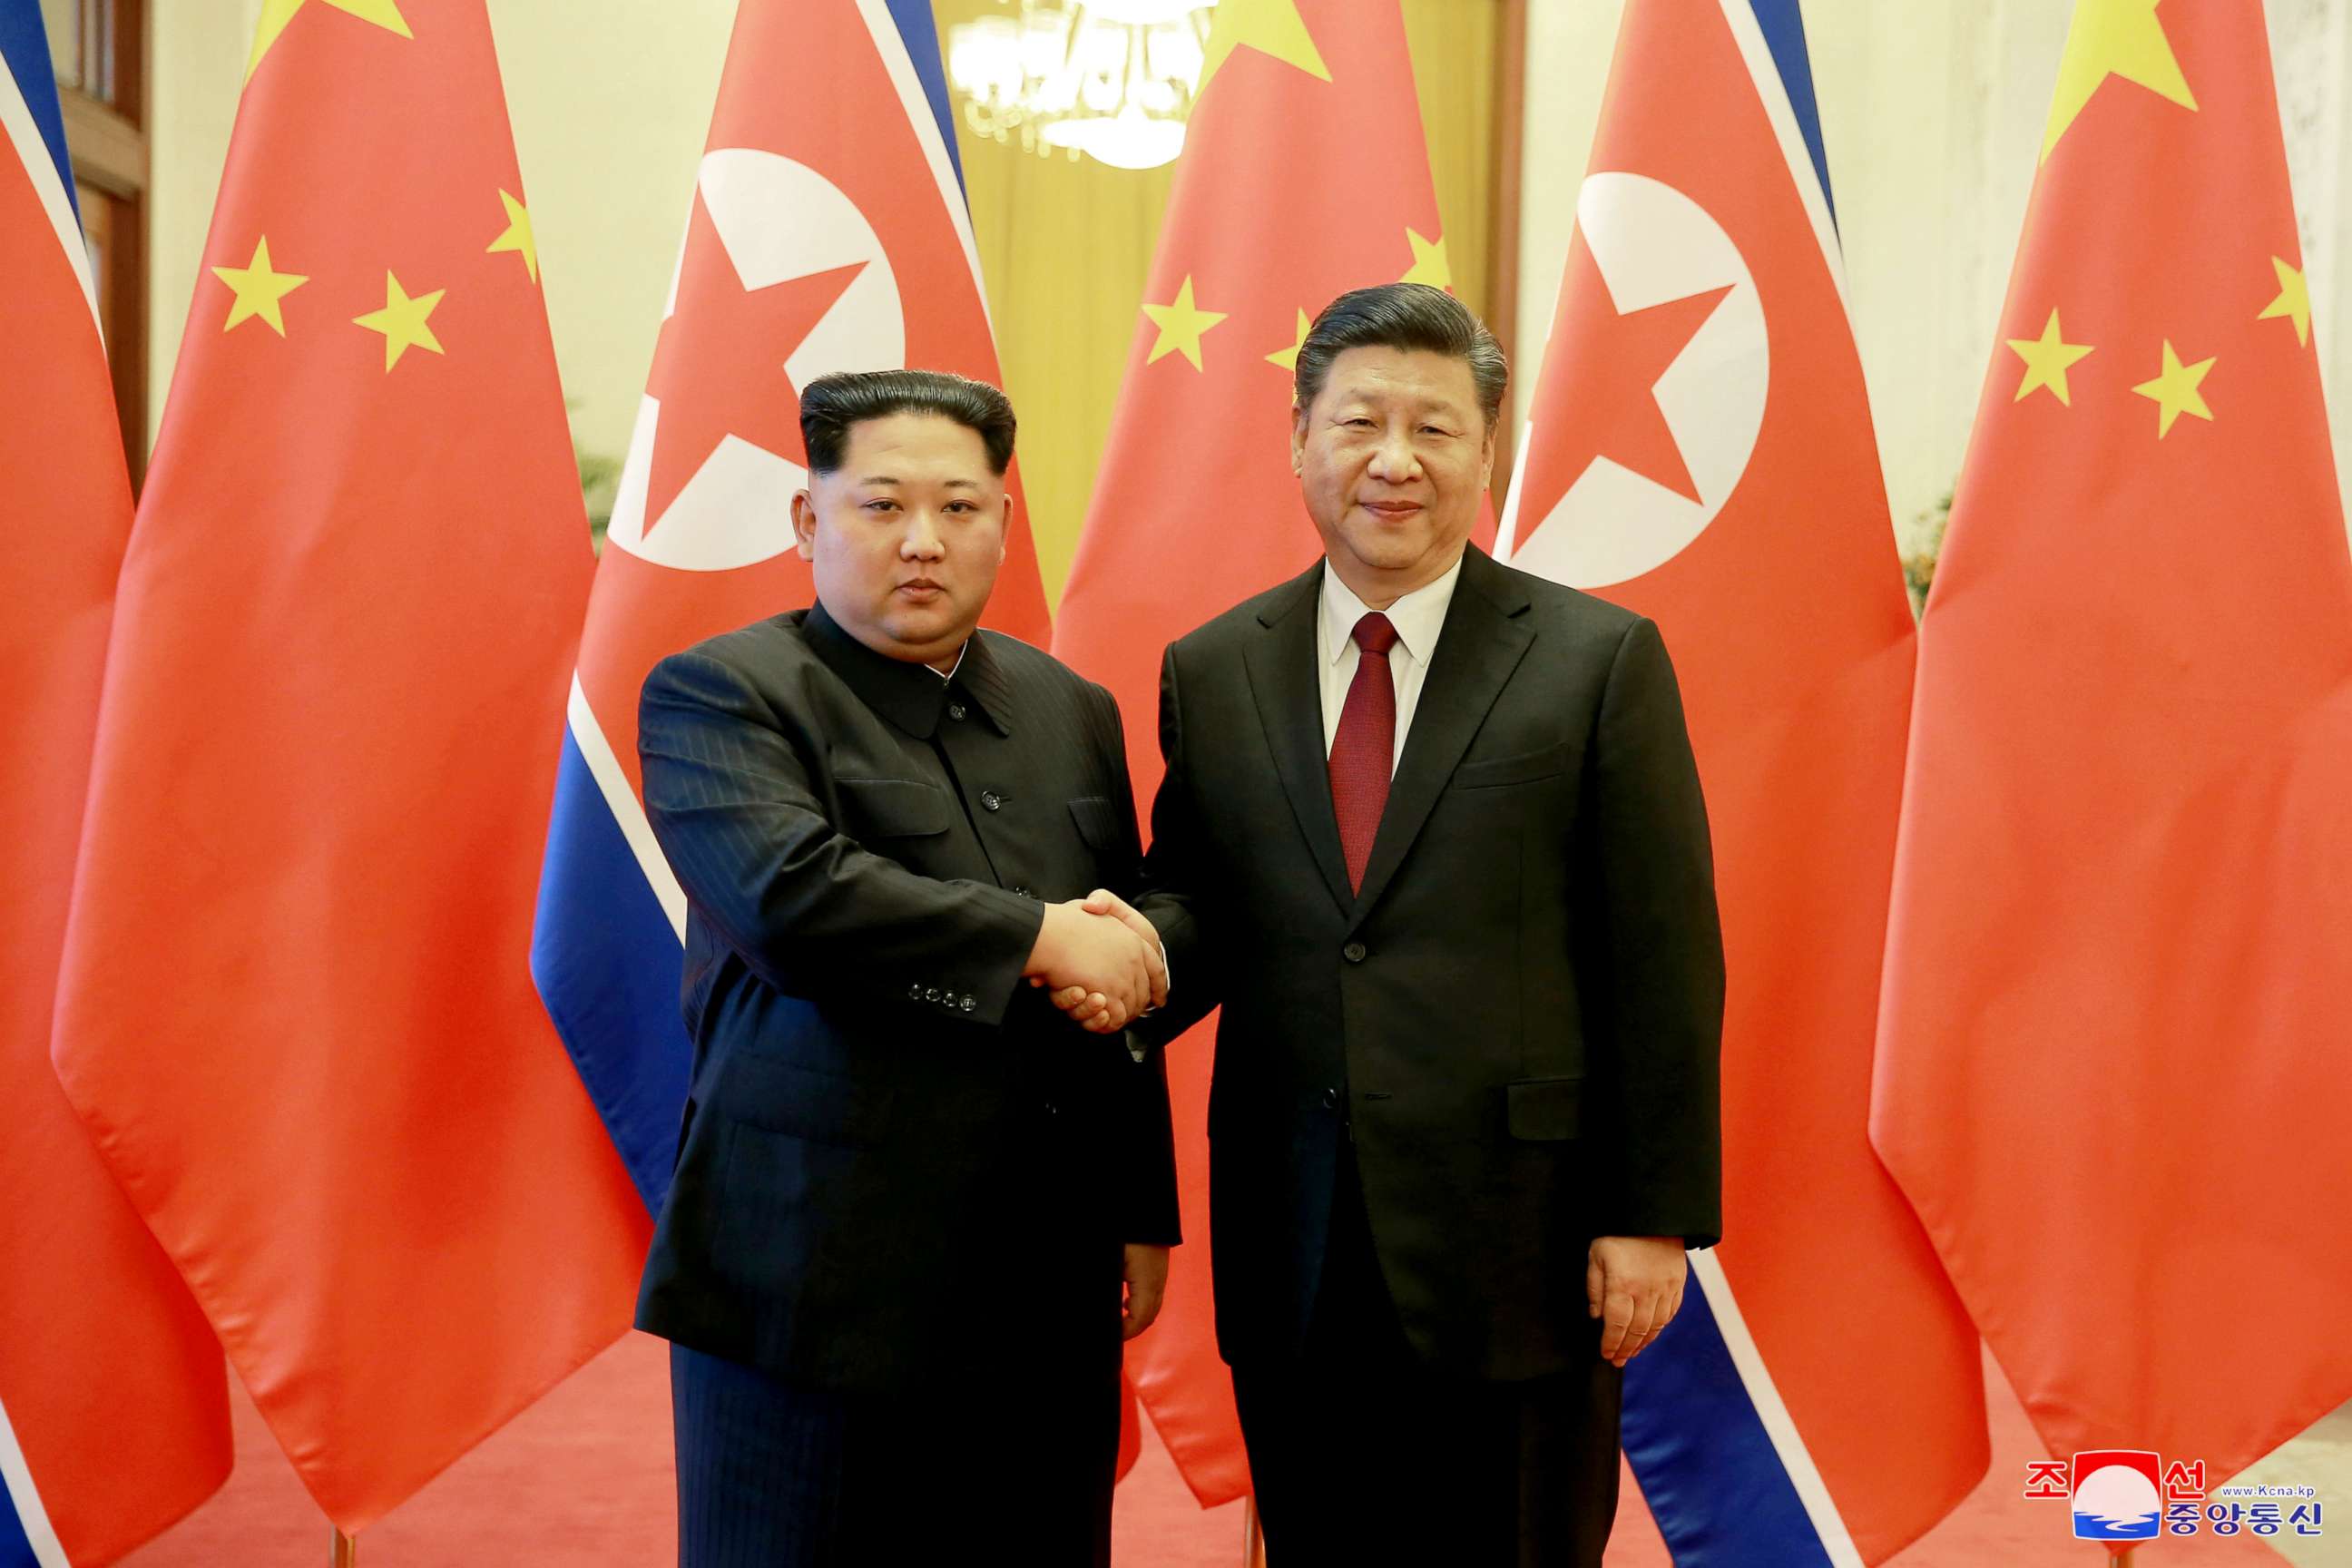 PHOTO: North Korean leader Kim Jong Un shakes hands with Chinese President Xi Jinping in Beijing as he paid an unofficial visit to China, in this undated photo released by North Korea's Korean Central News Agency in Pyongyang March 28, 2018.